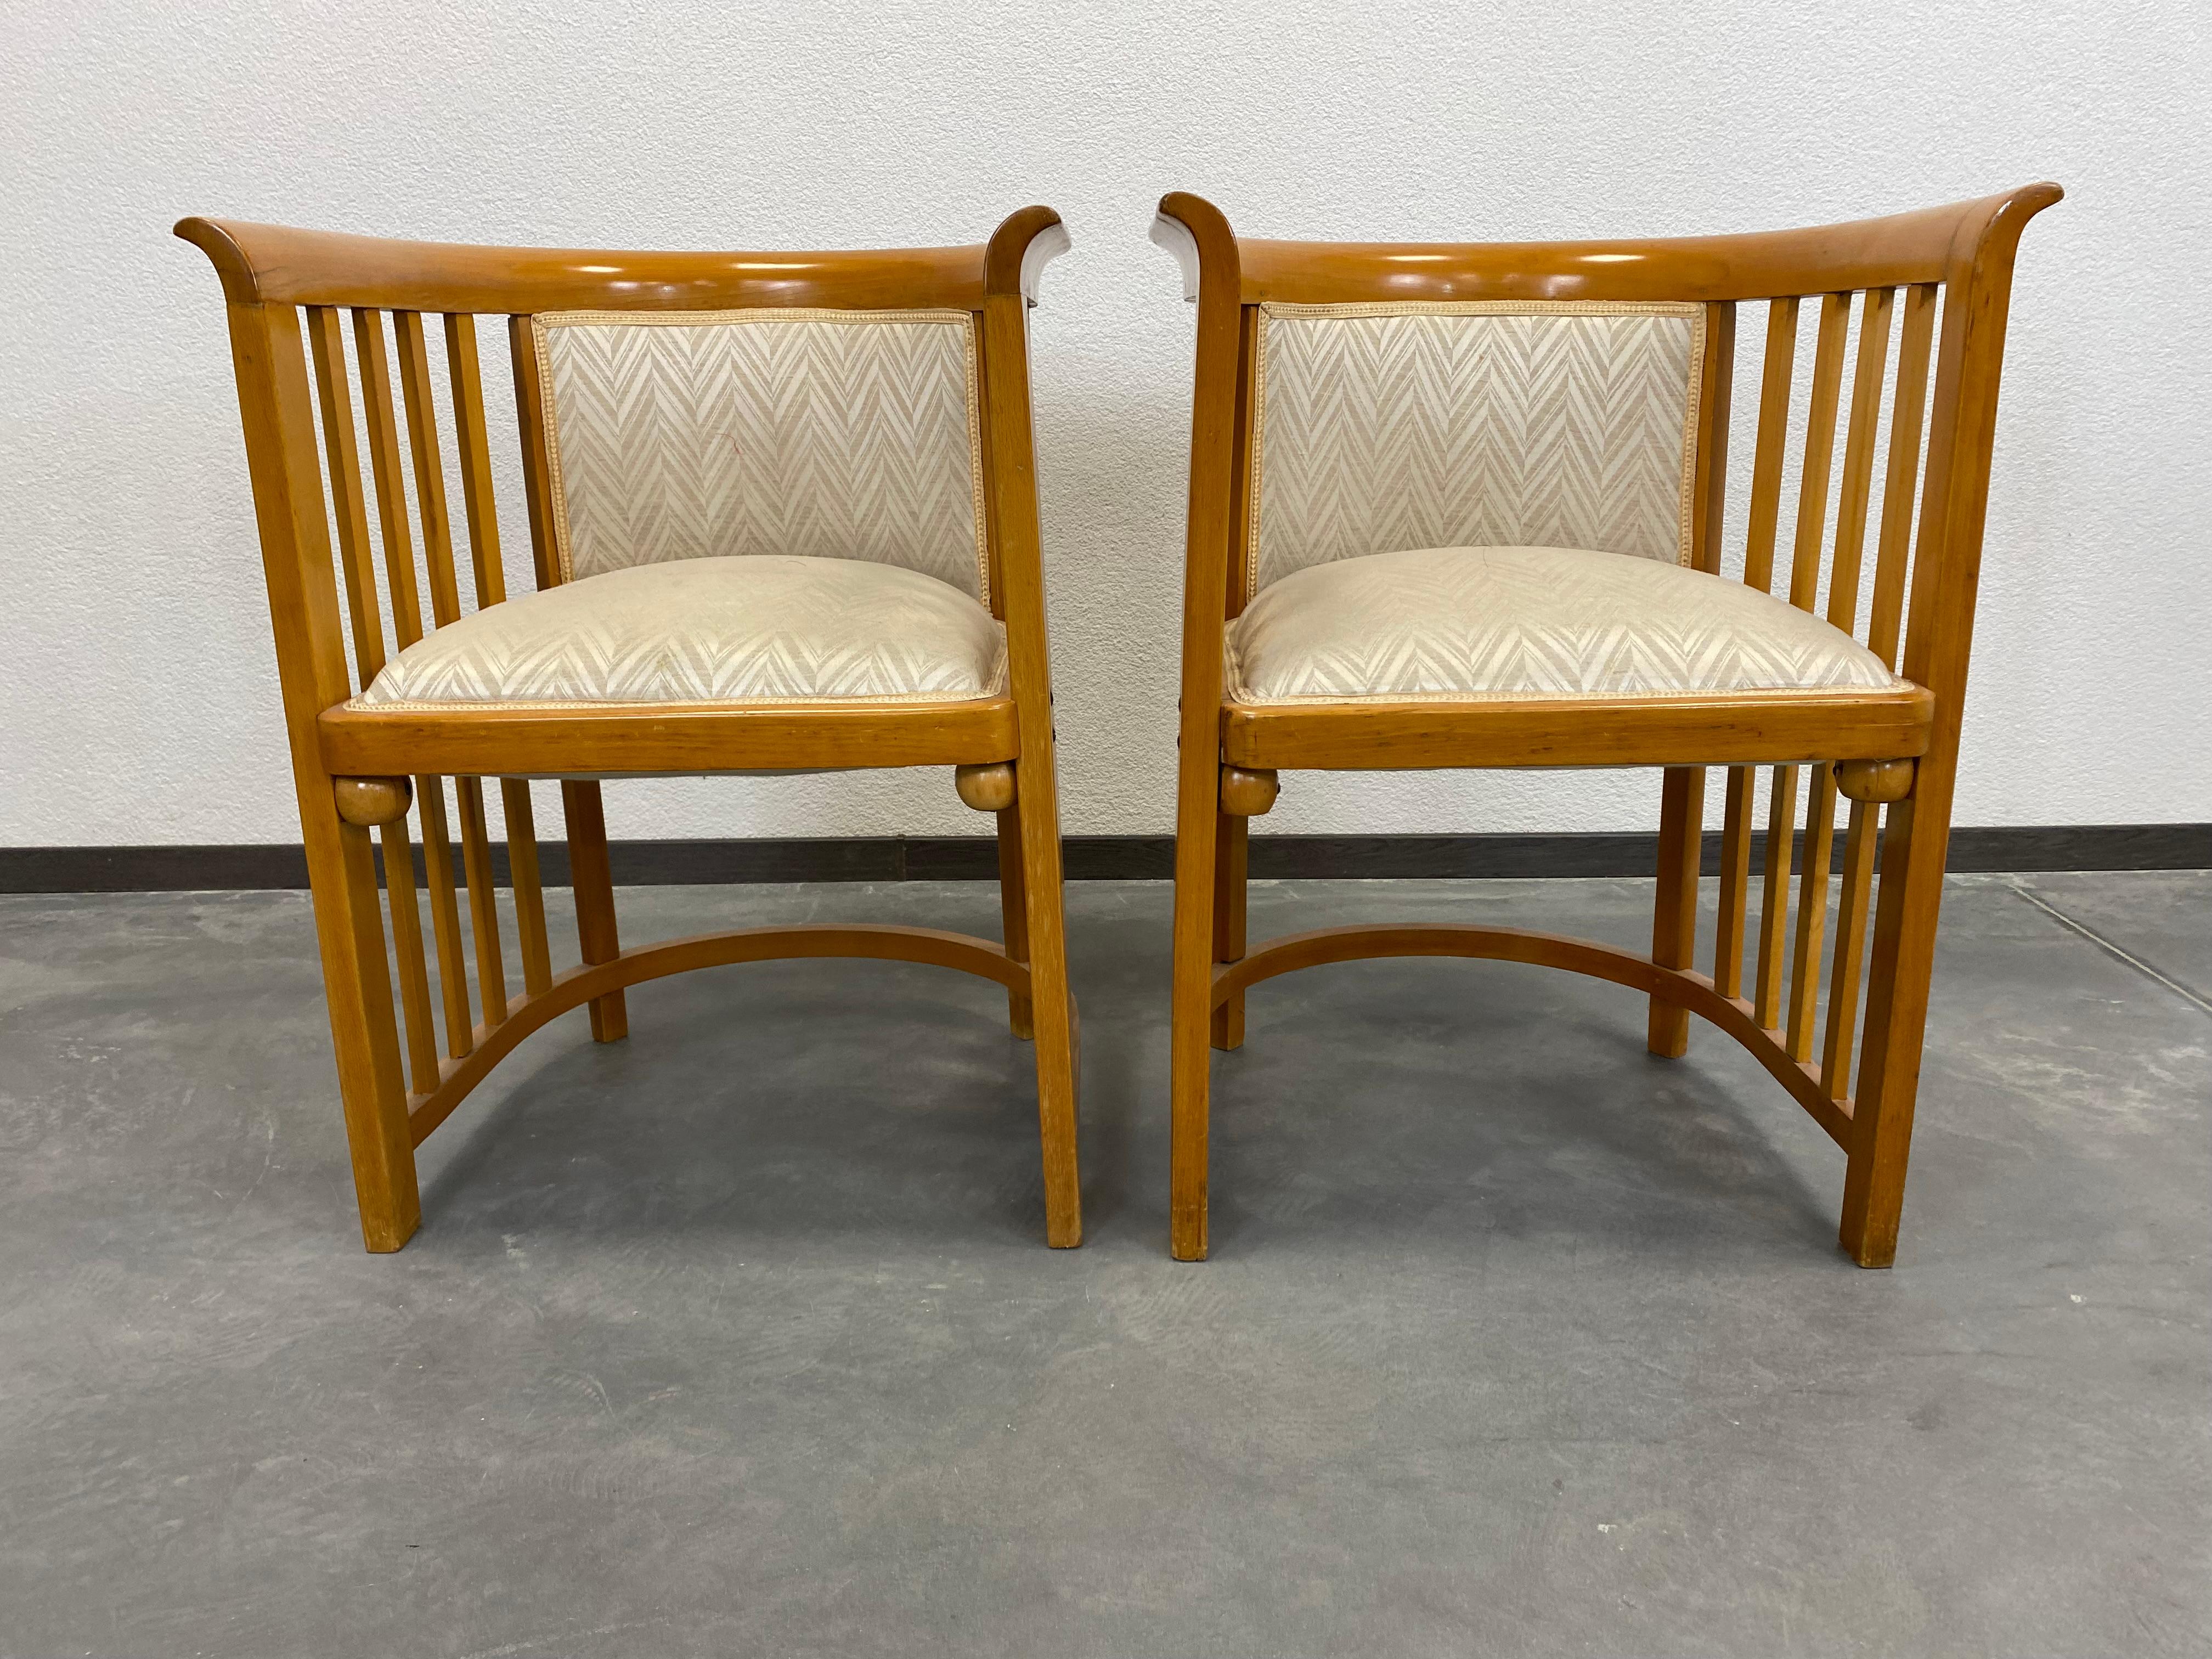 Vienna Secession Fledermaus Secession Armchairs No.423 For Sale